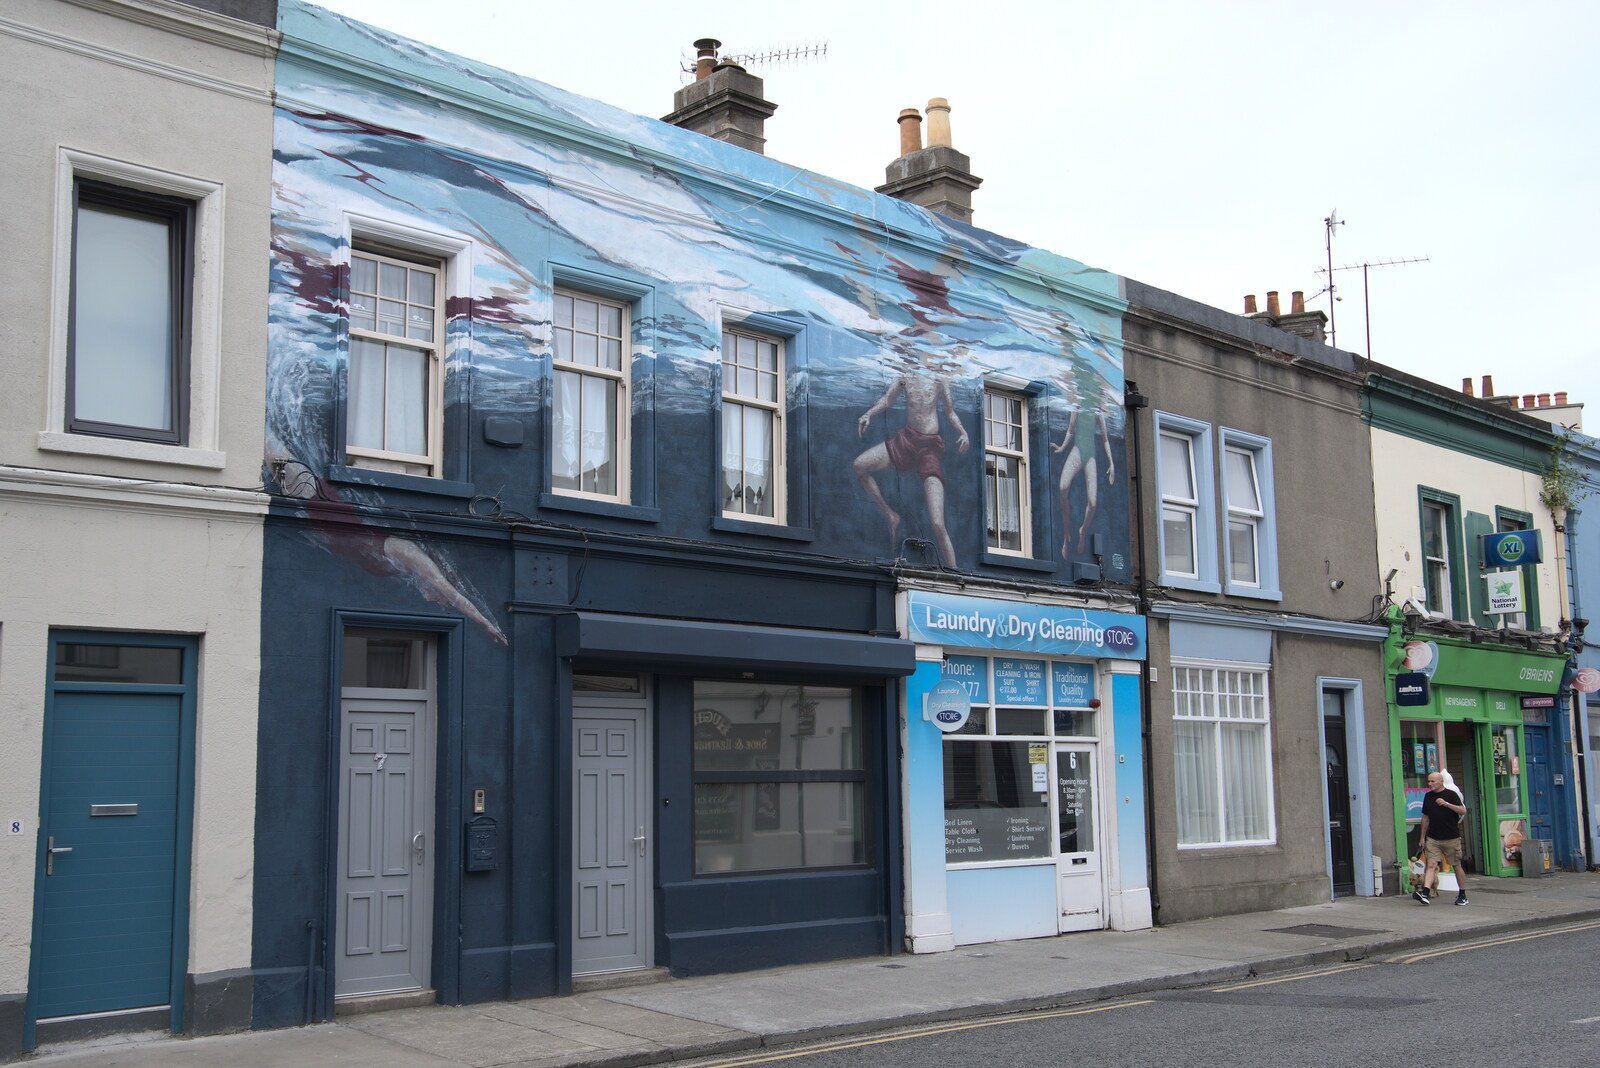 An entire swimming scene on a building from Manorhamilton and the Street Art of Dún Laoghaire, Ireland - 15th August 2021